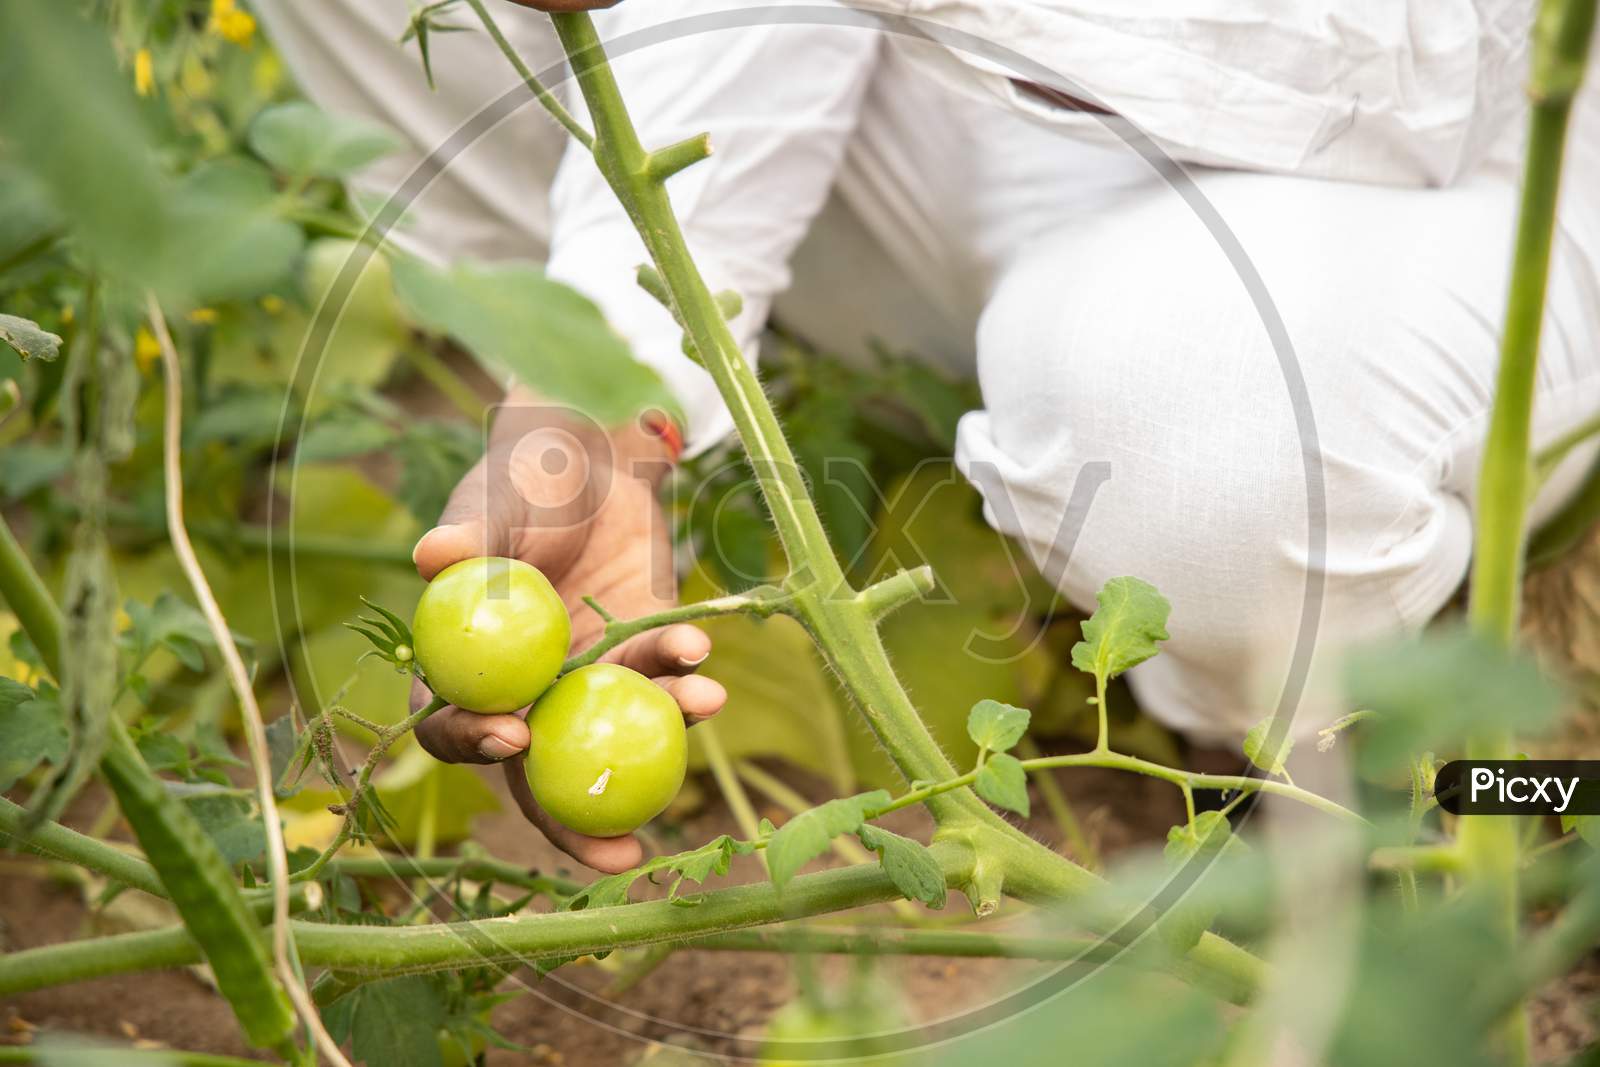 Closeup Of Farmer Hand Inspecting Or Holding Unripe Tomatoes Before Harvesting, Organic Farming And Agriculture Concept.